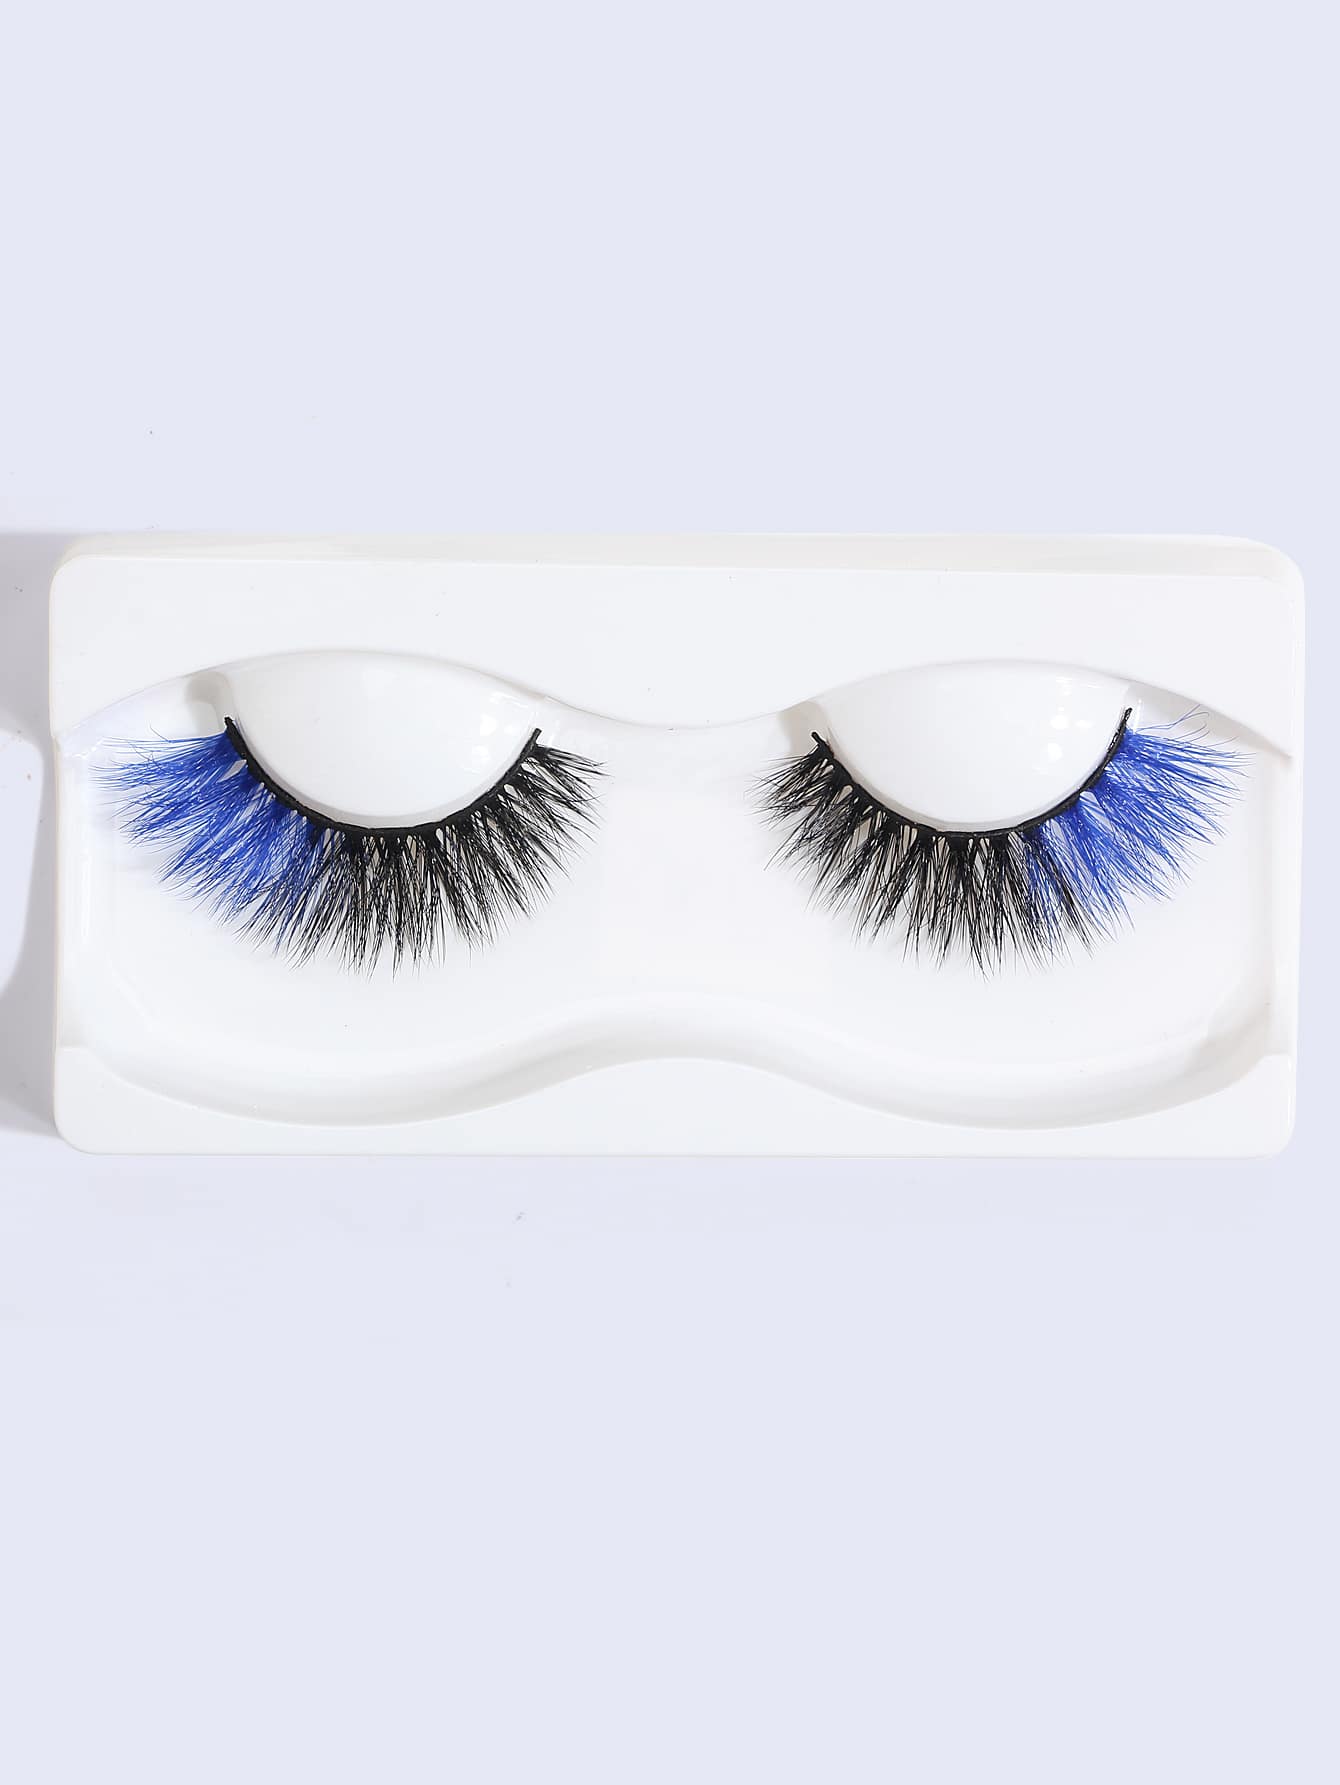 1 Pair False Eyelashes Mix Color Cosplay Eyelashes For Extension Colorful 3D Fluffy Mink Lash Beauty Makeup Tools